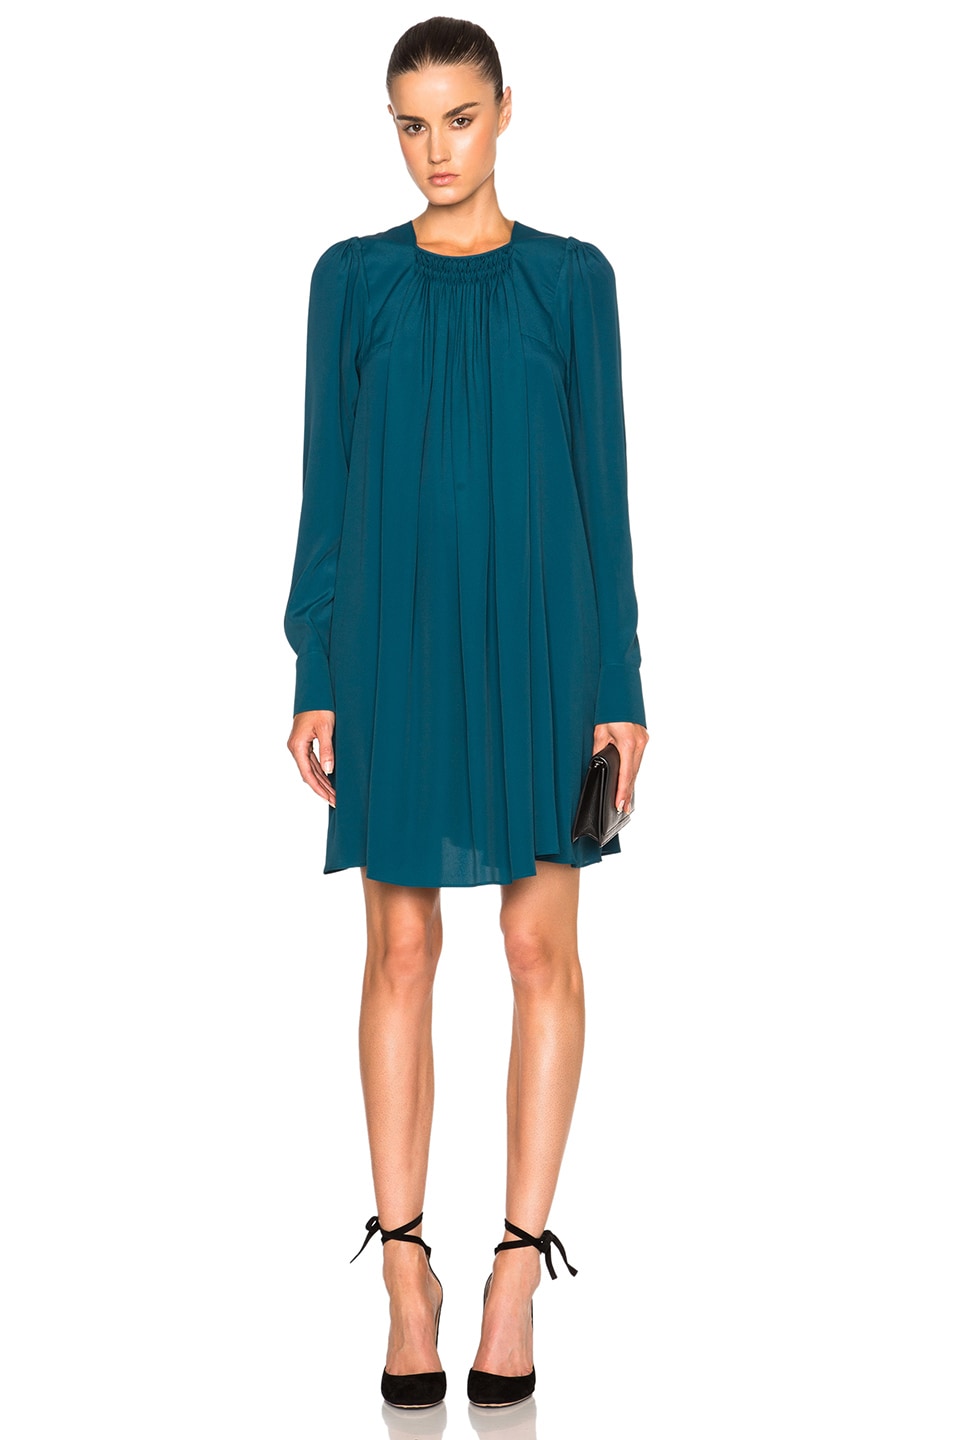 Image 1 of No. 21 Crepe De Chine Dress in Teal